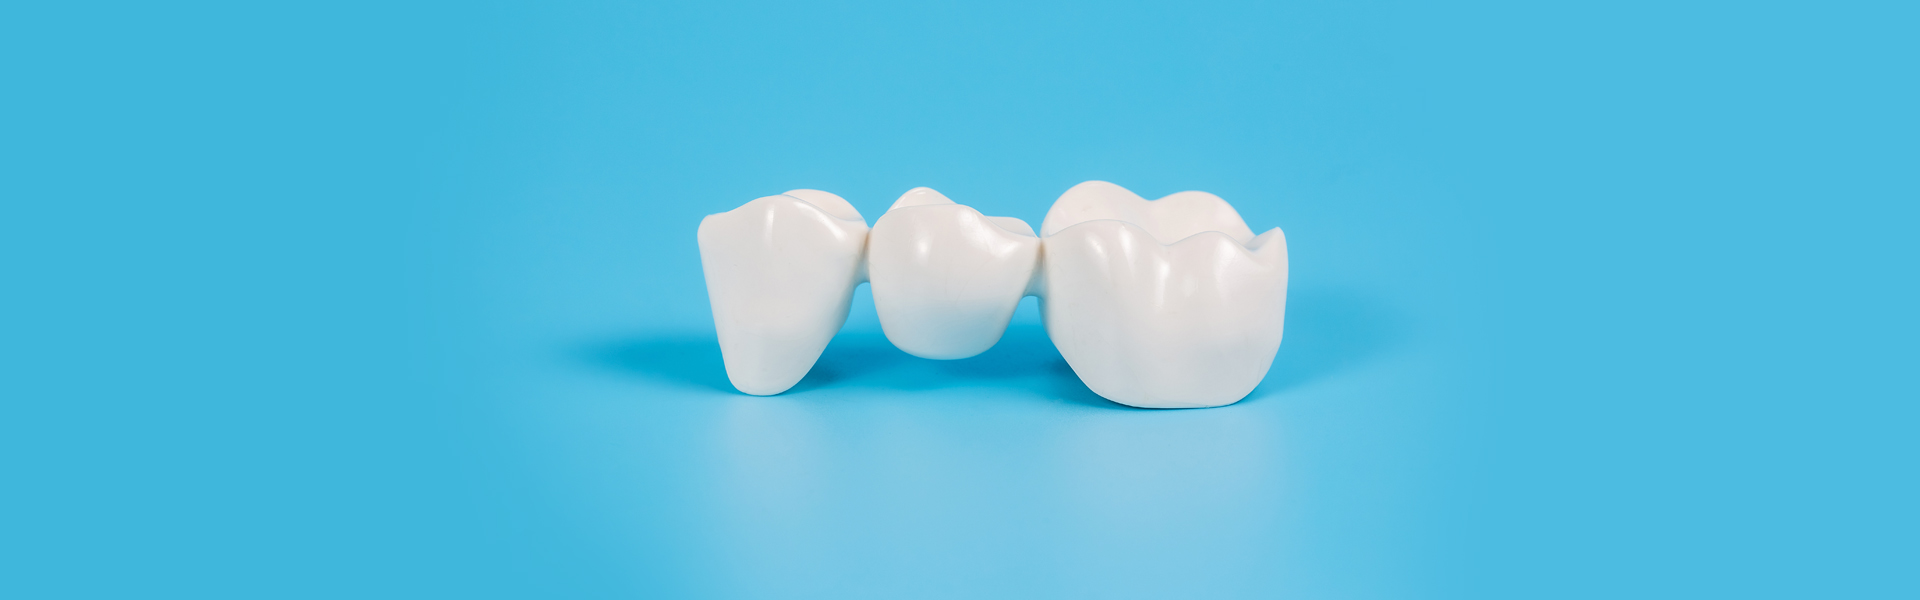 5 Factors Considered During a Dental Crown Placement Procedure